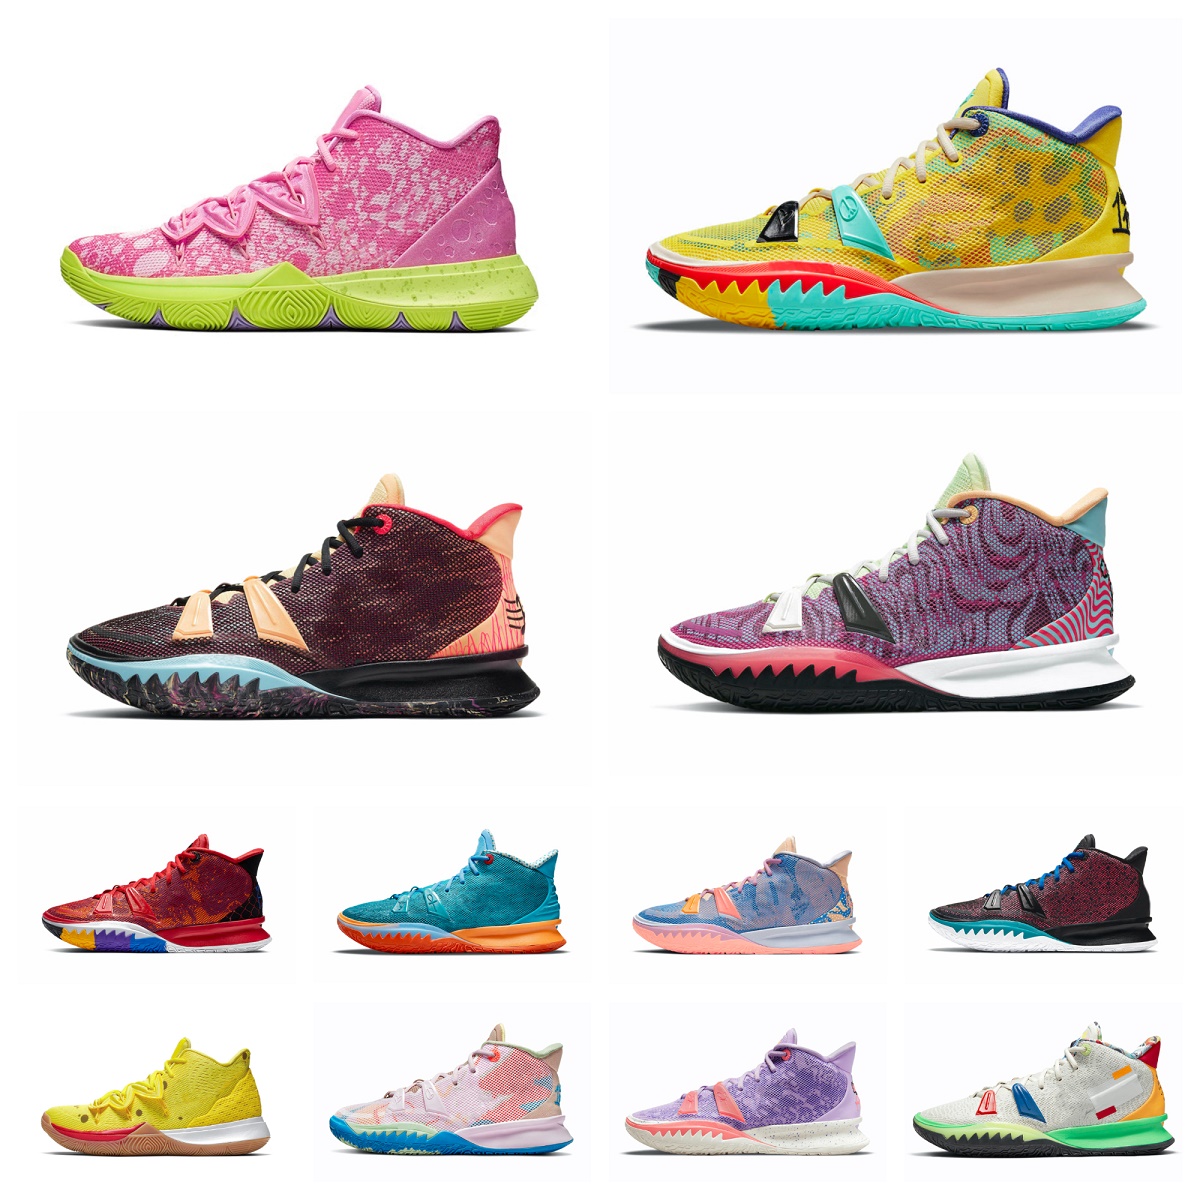 

Designer KYRie 7 Mens Basketball Shoes Kyries 5 One World 1 People Pink Yellow Roswell Rayguns Preheat Soundwave Daughters Azurie Expressions Bred Visions Trainers, Bubble package bag